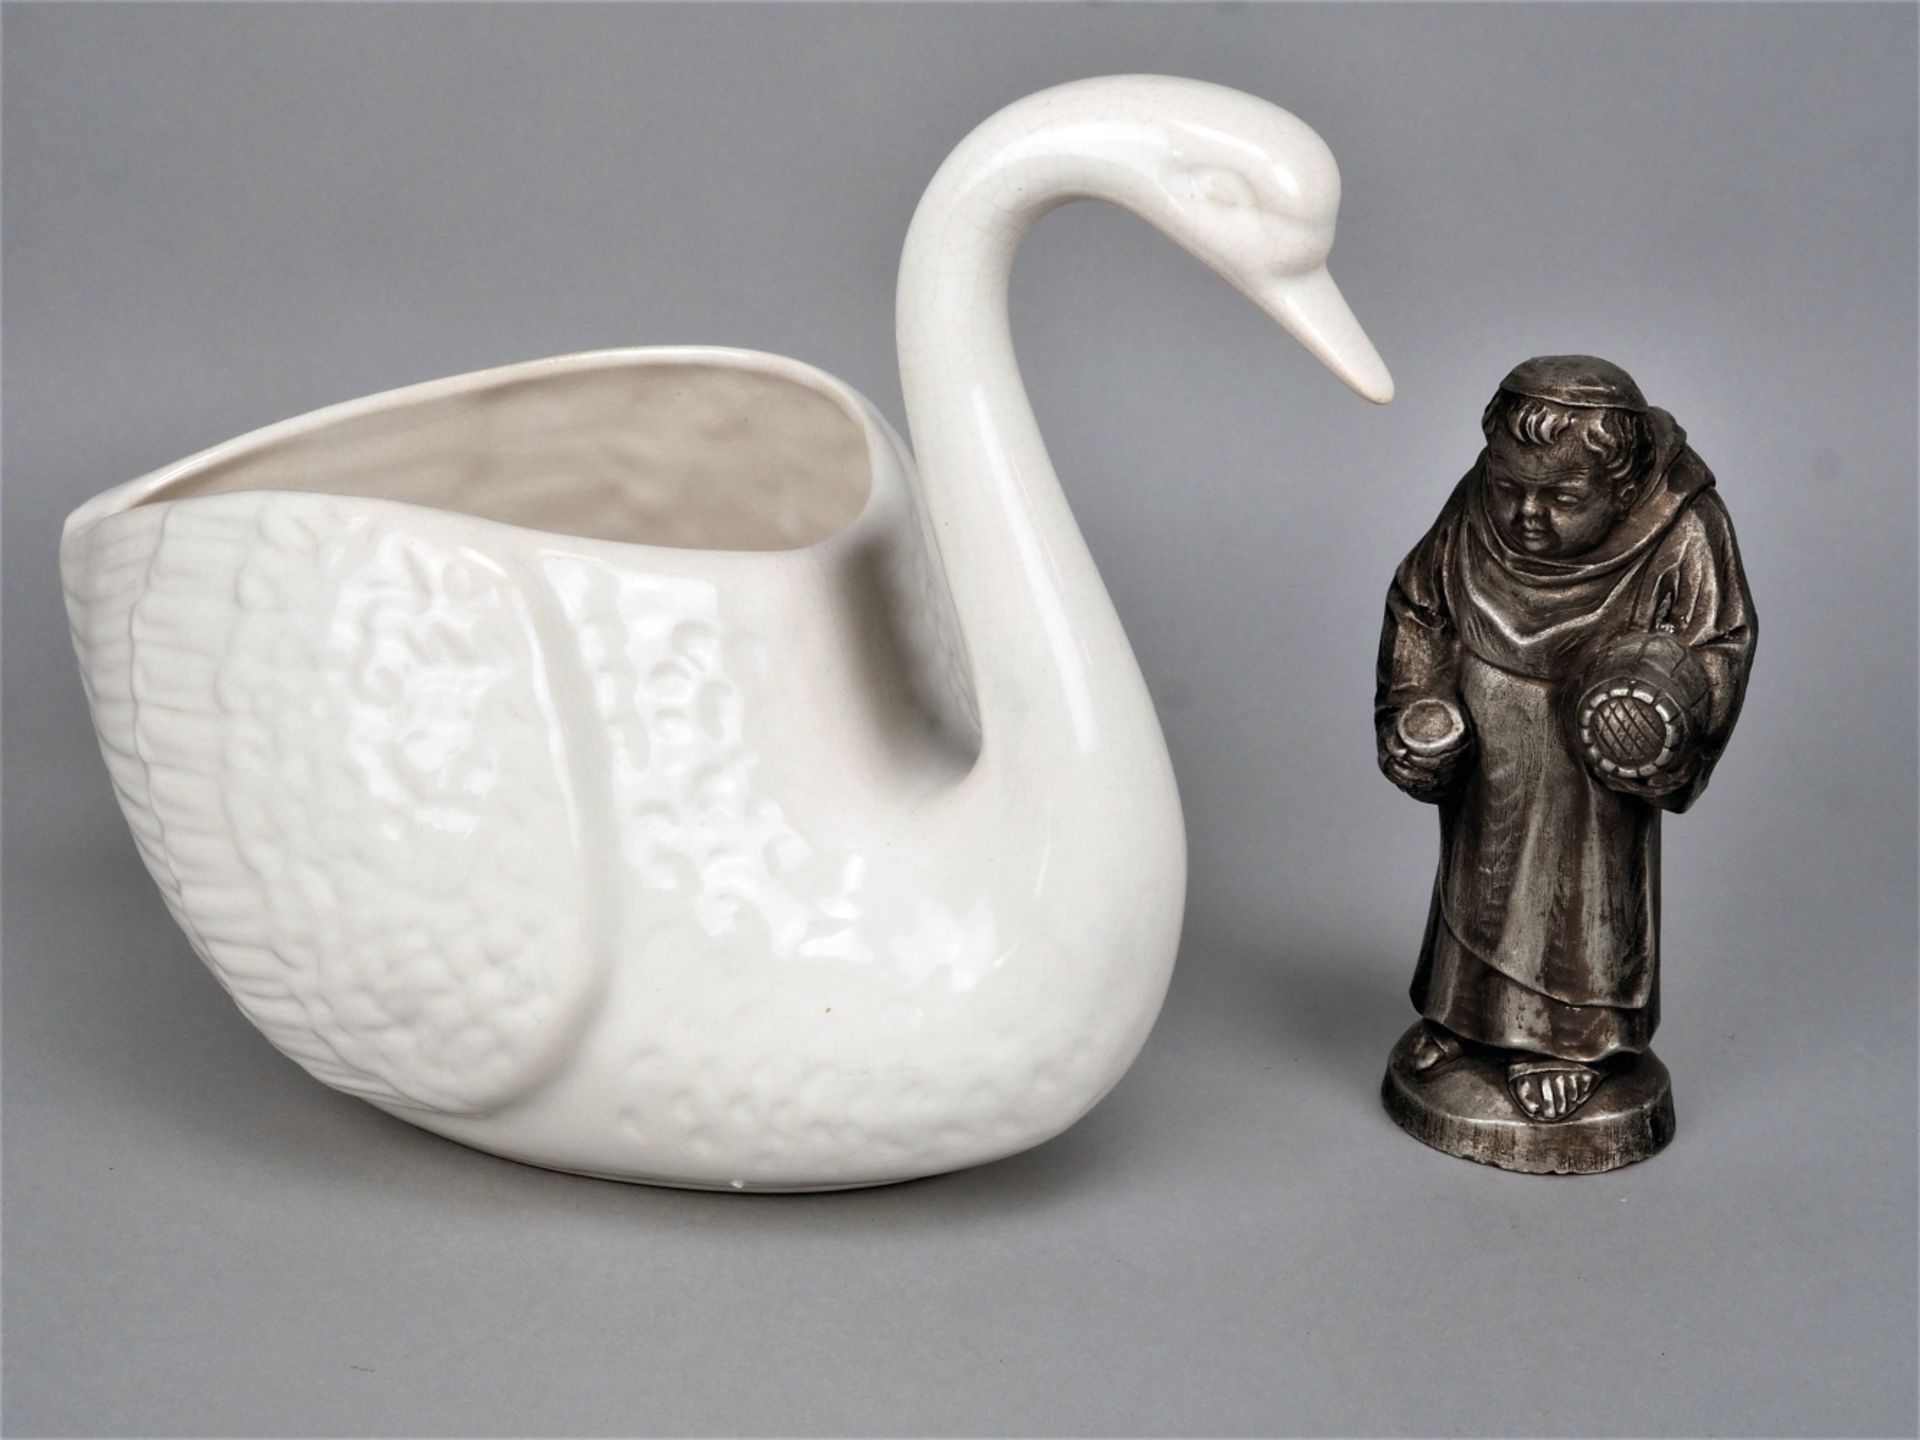 Two figures, swan and monk